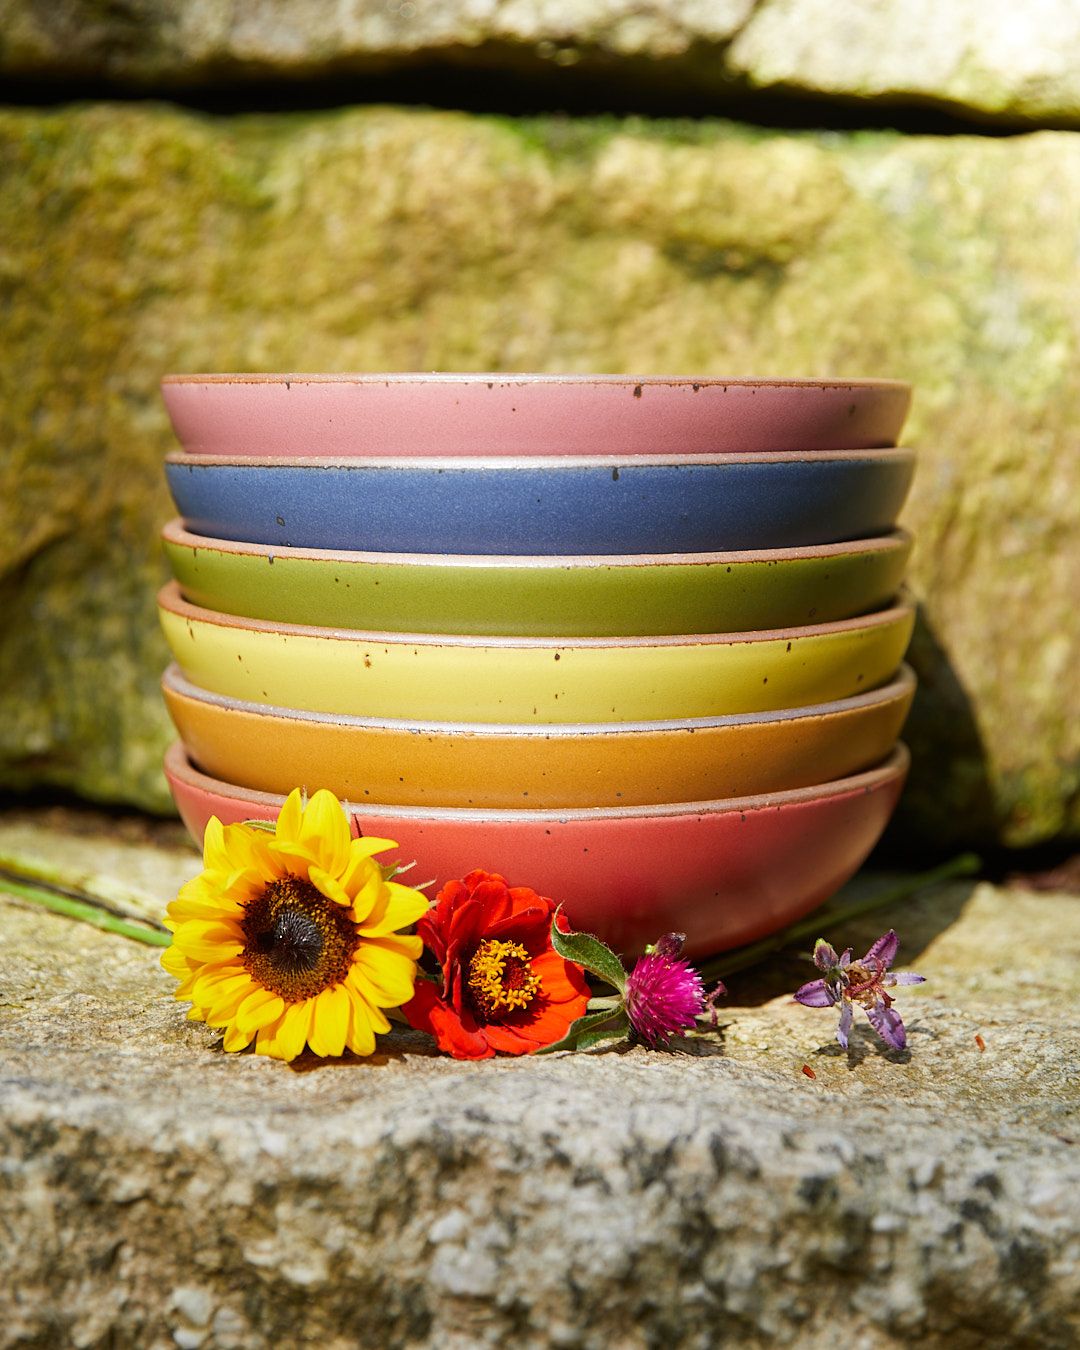 Six bowls in pink, blue, green, yellow, orange, and red sitting on a stone step with flowers in front of them